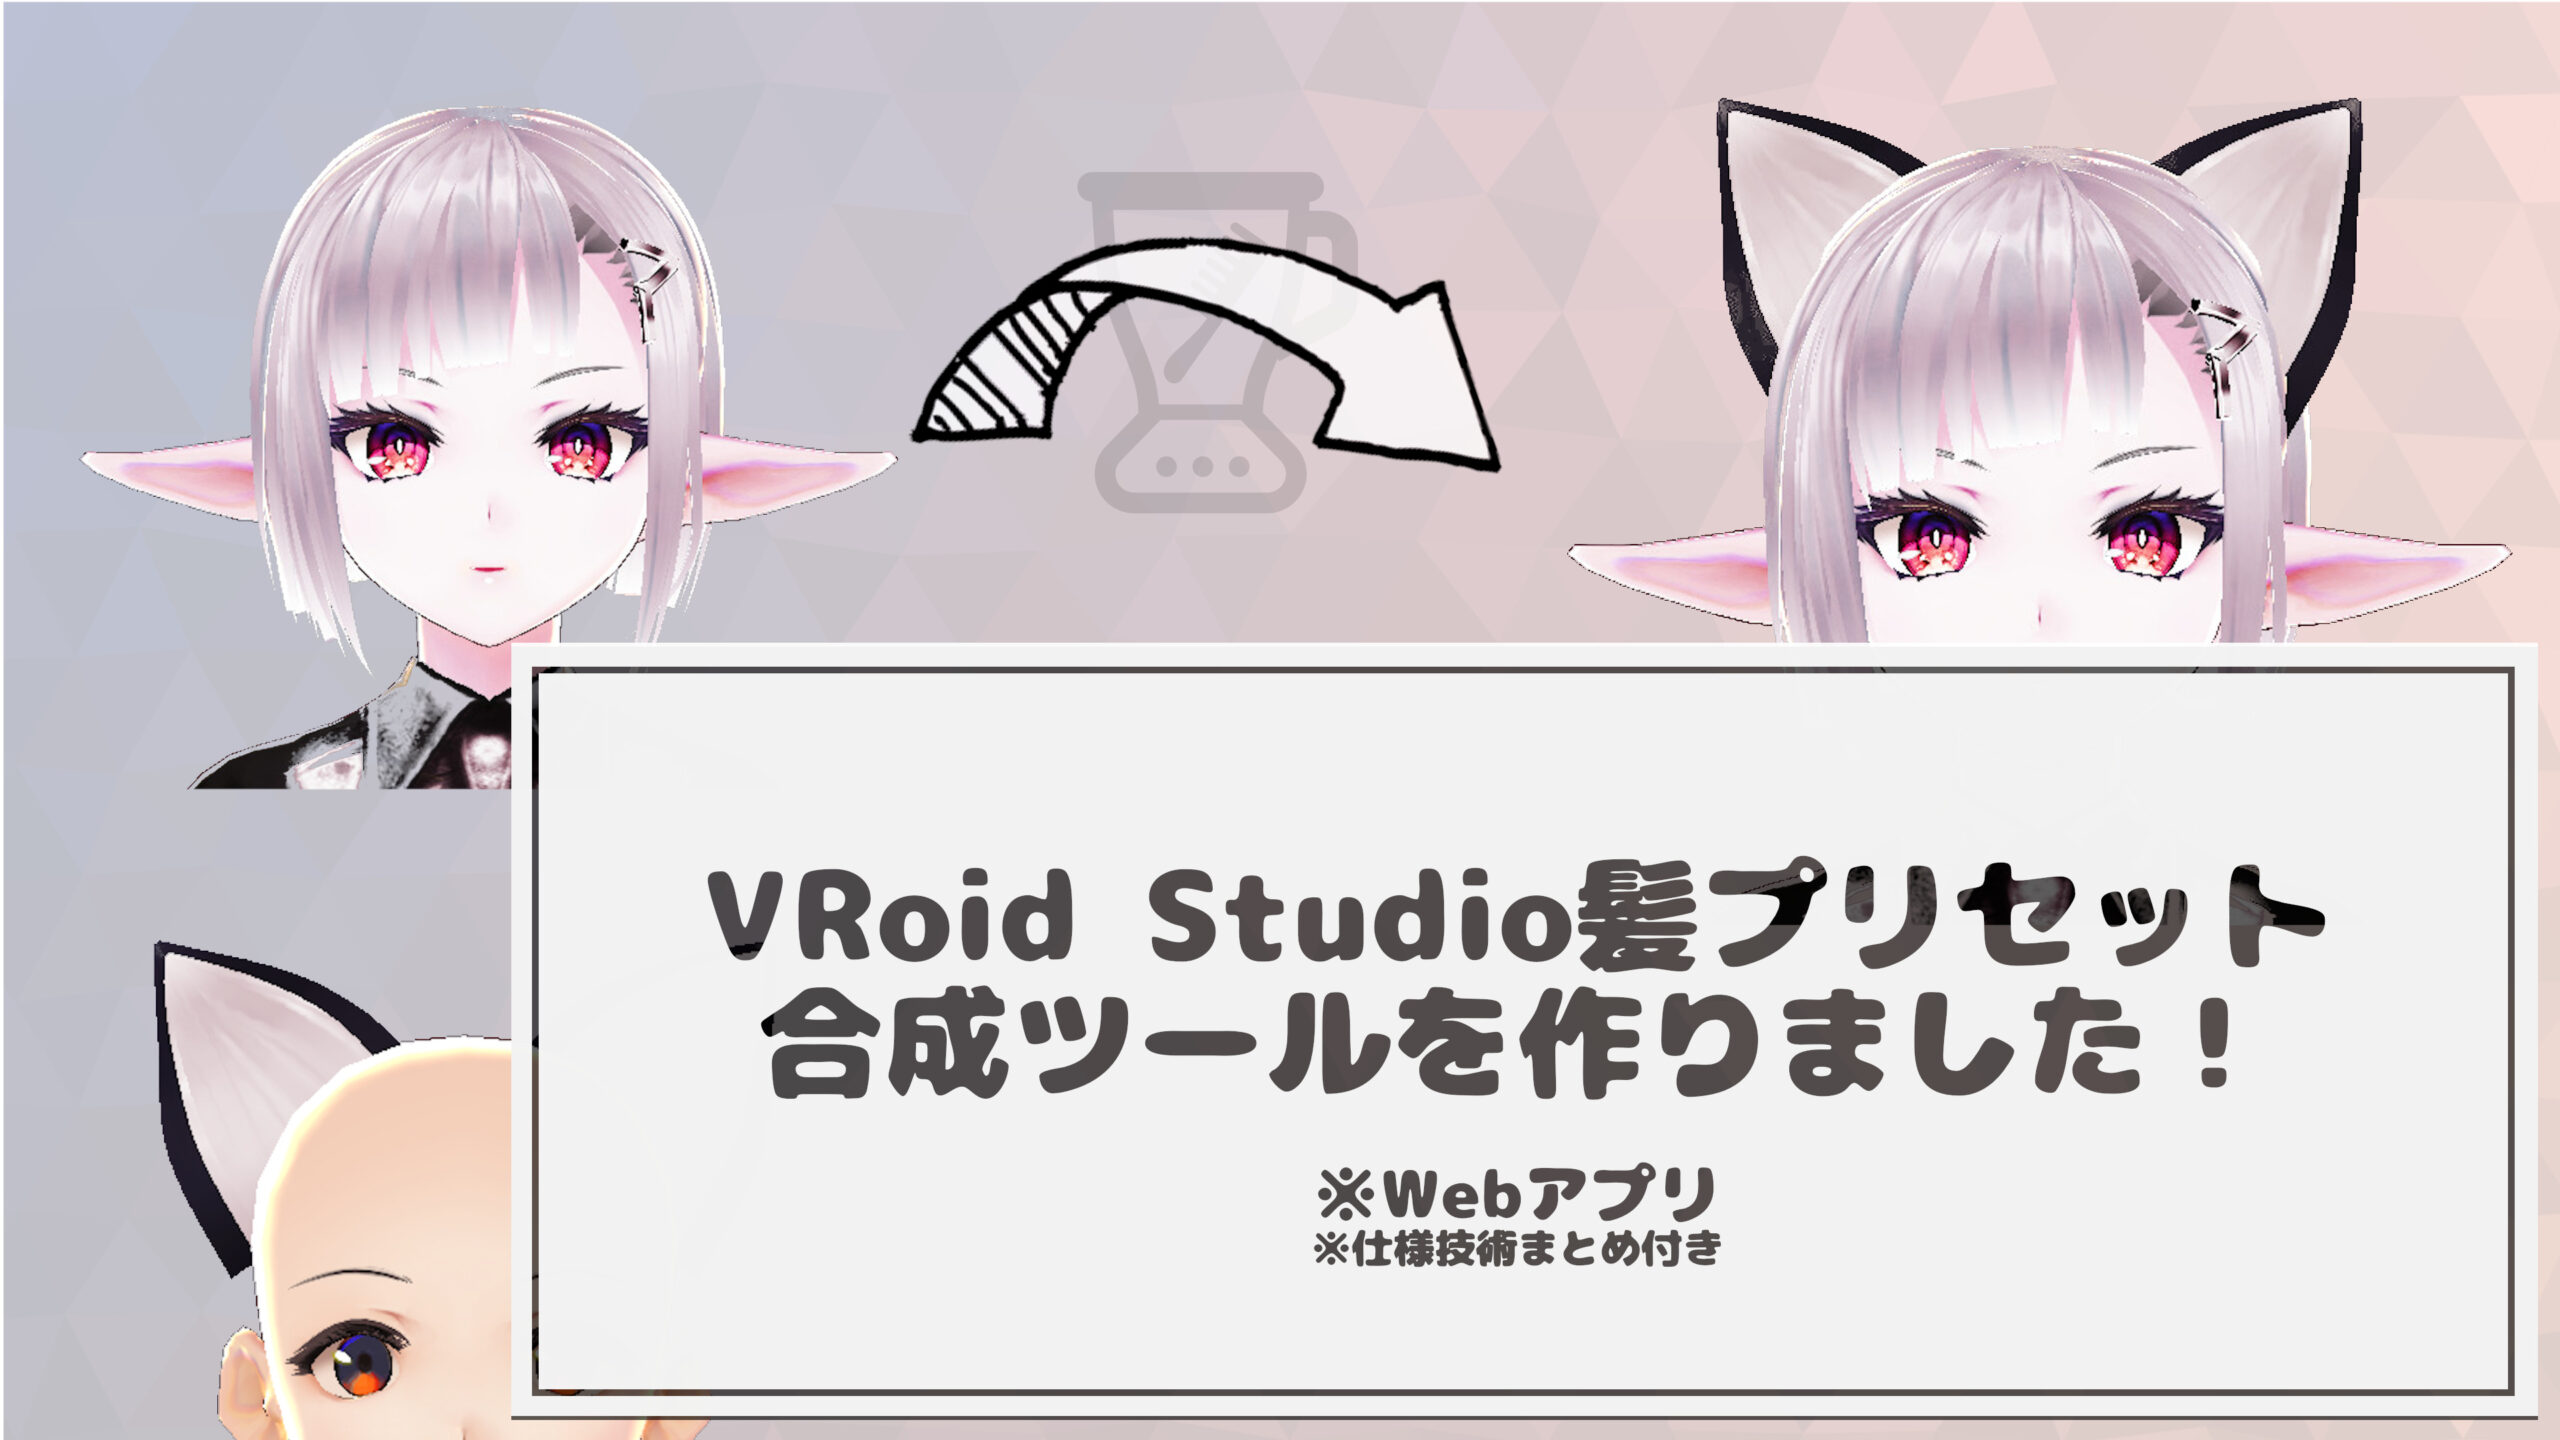 You are currently viewing VRoidStudioの髪型合成ツールを作りました！